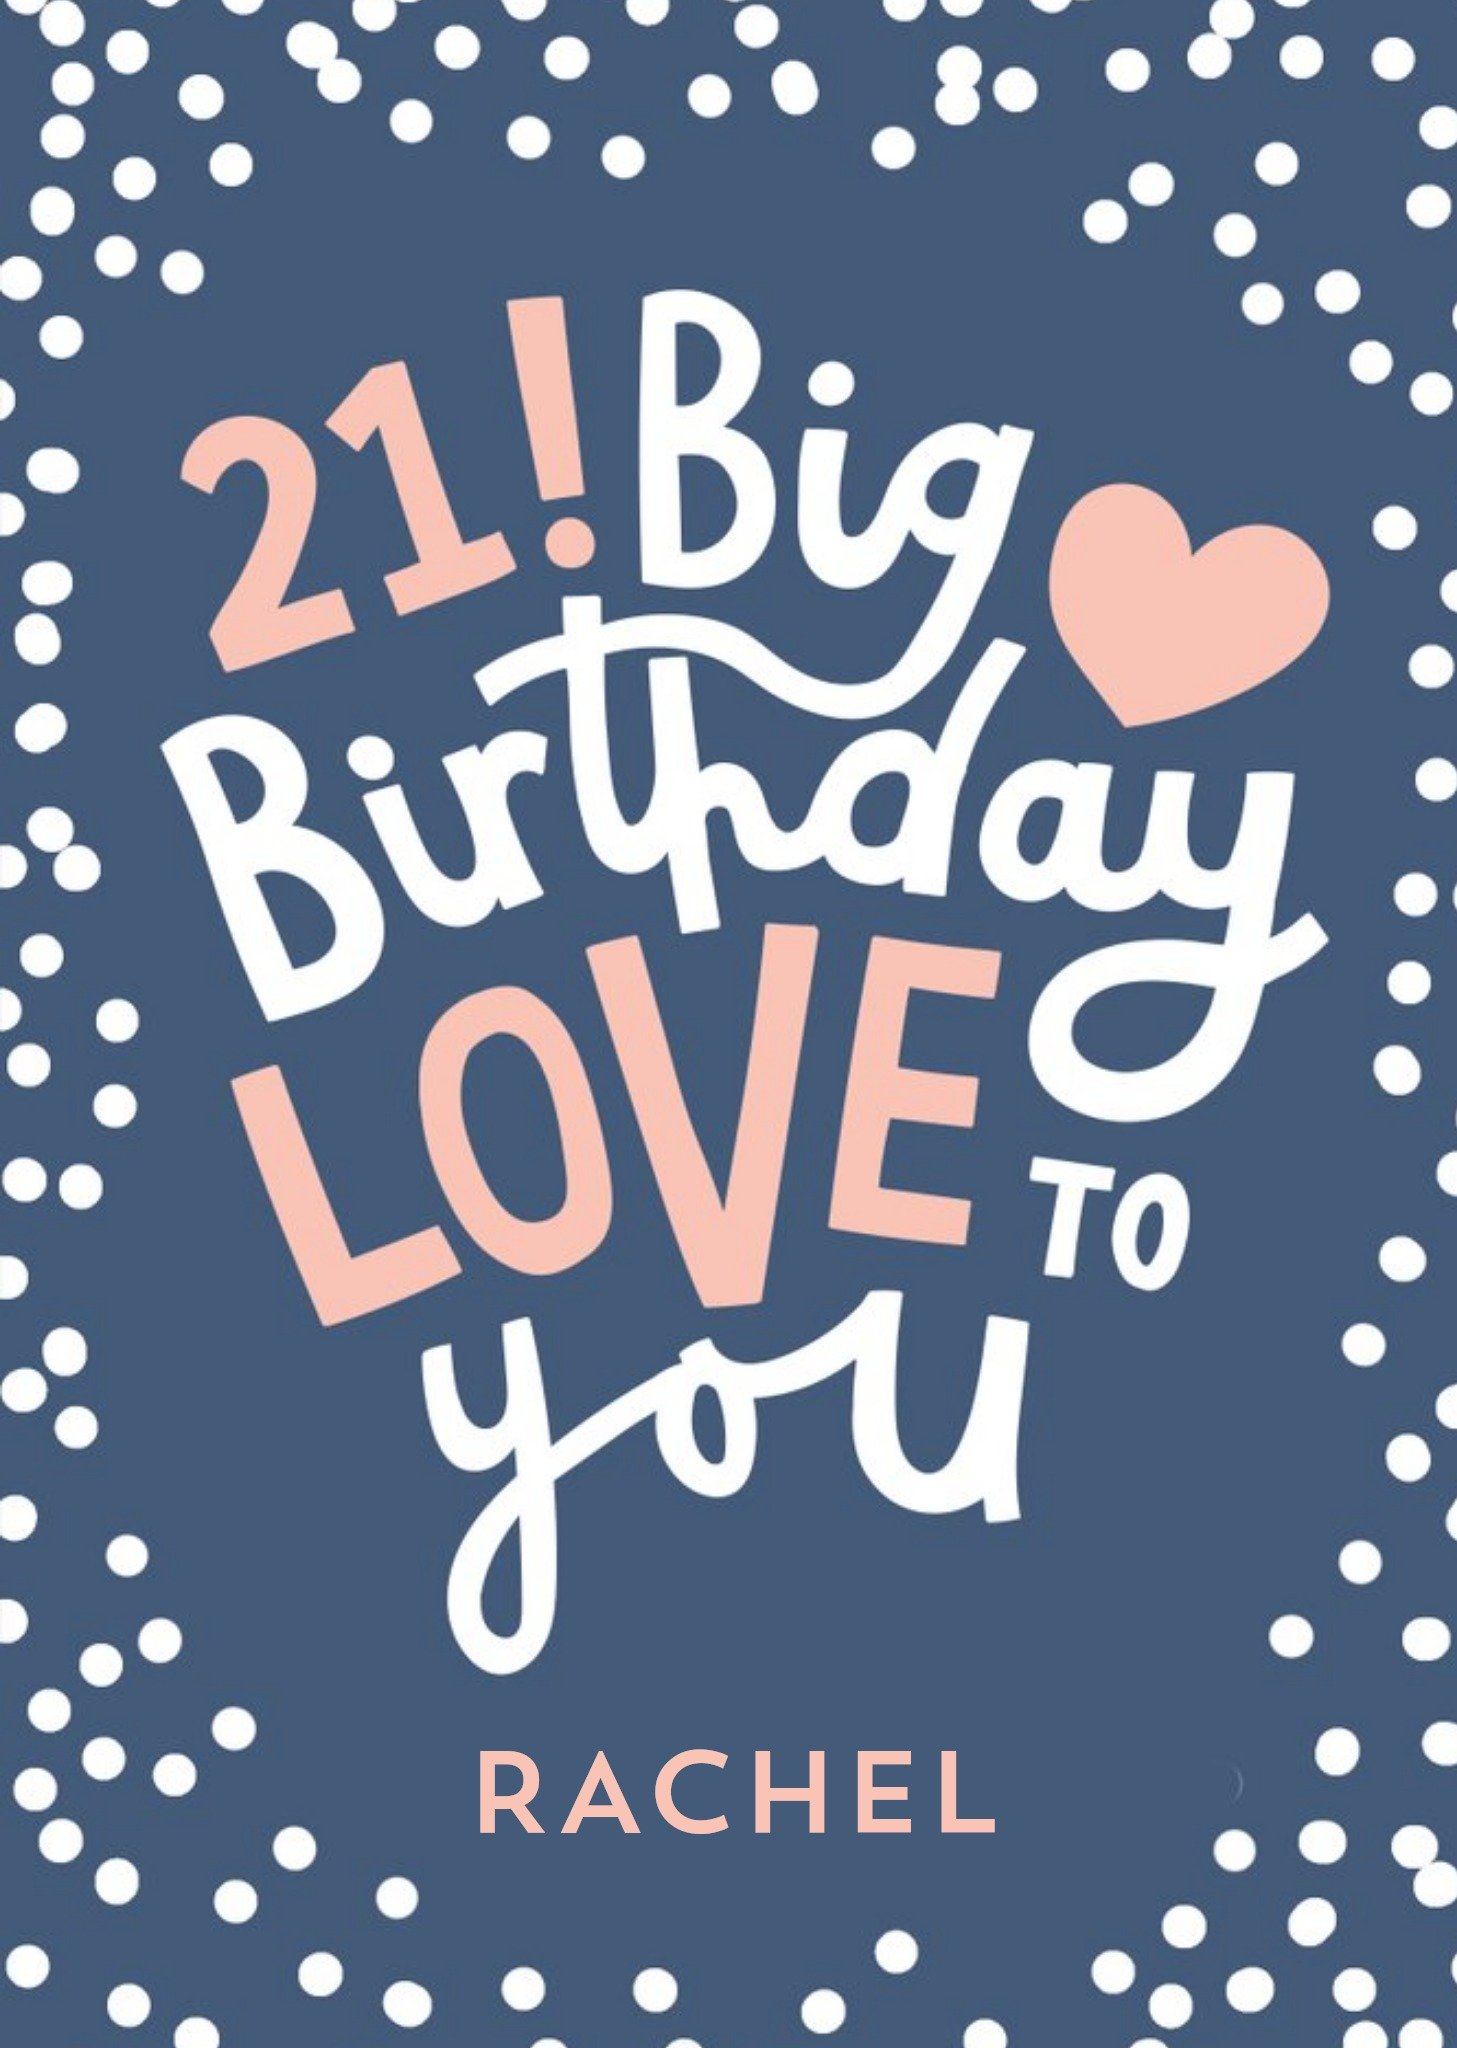 Moonpig Typographic 21 Big Birthday Love To You Card, Large